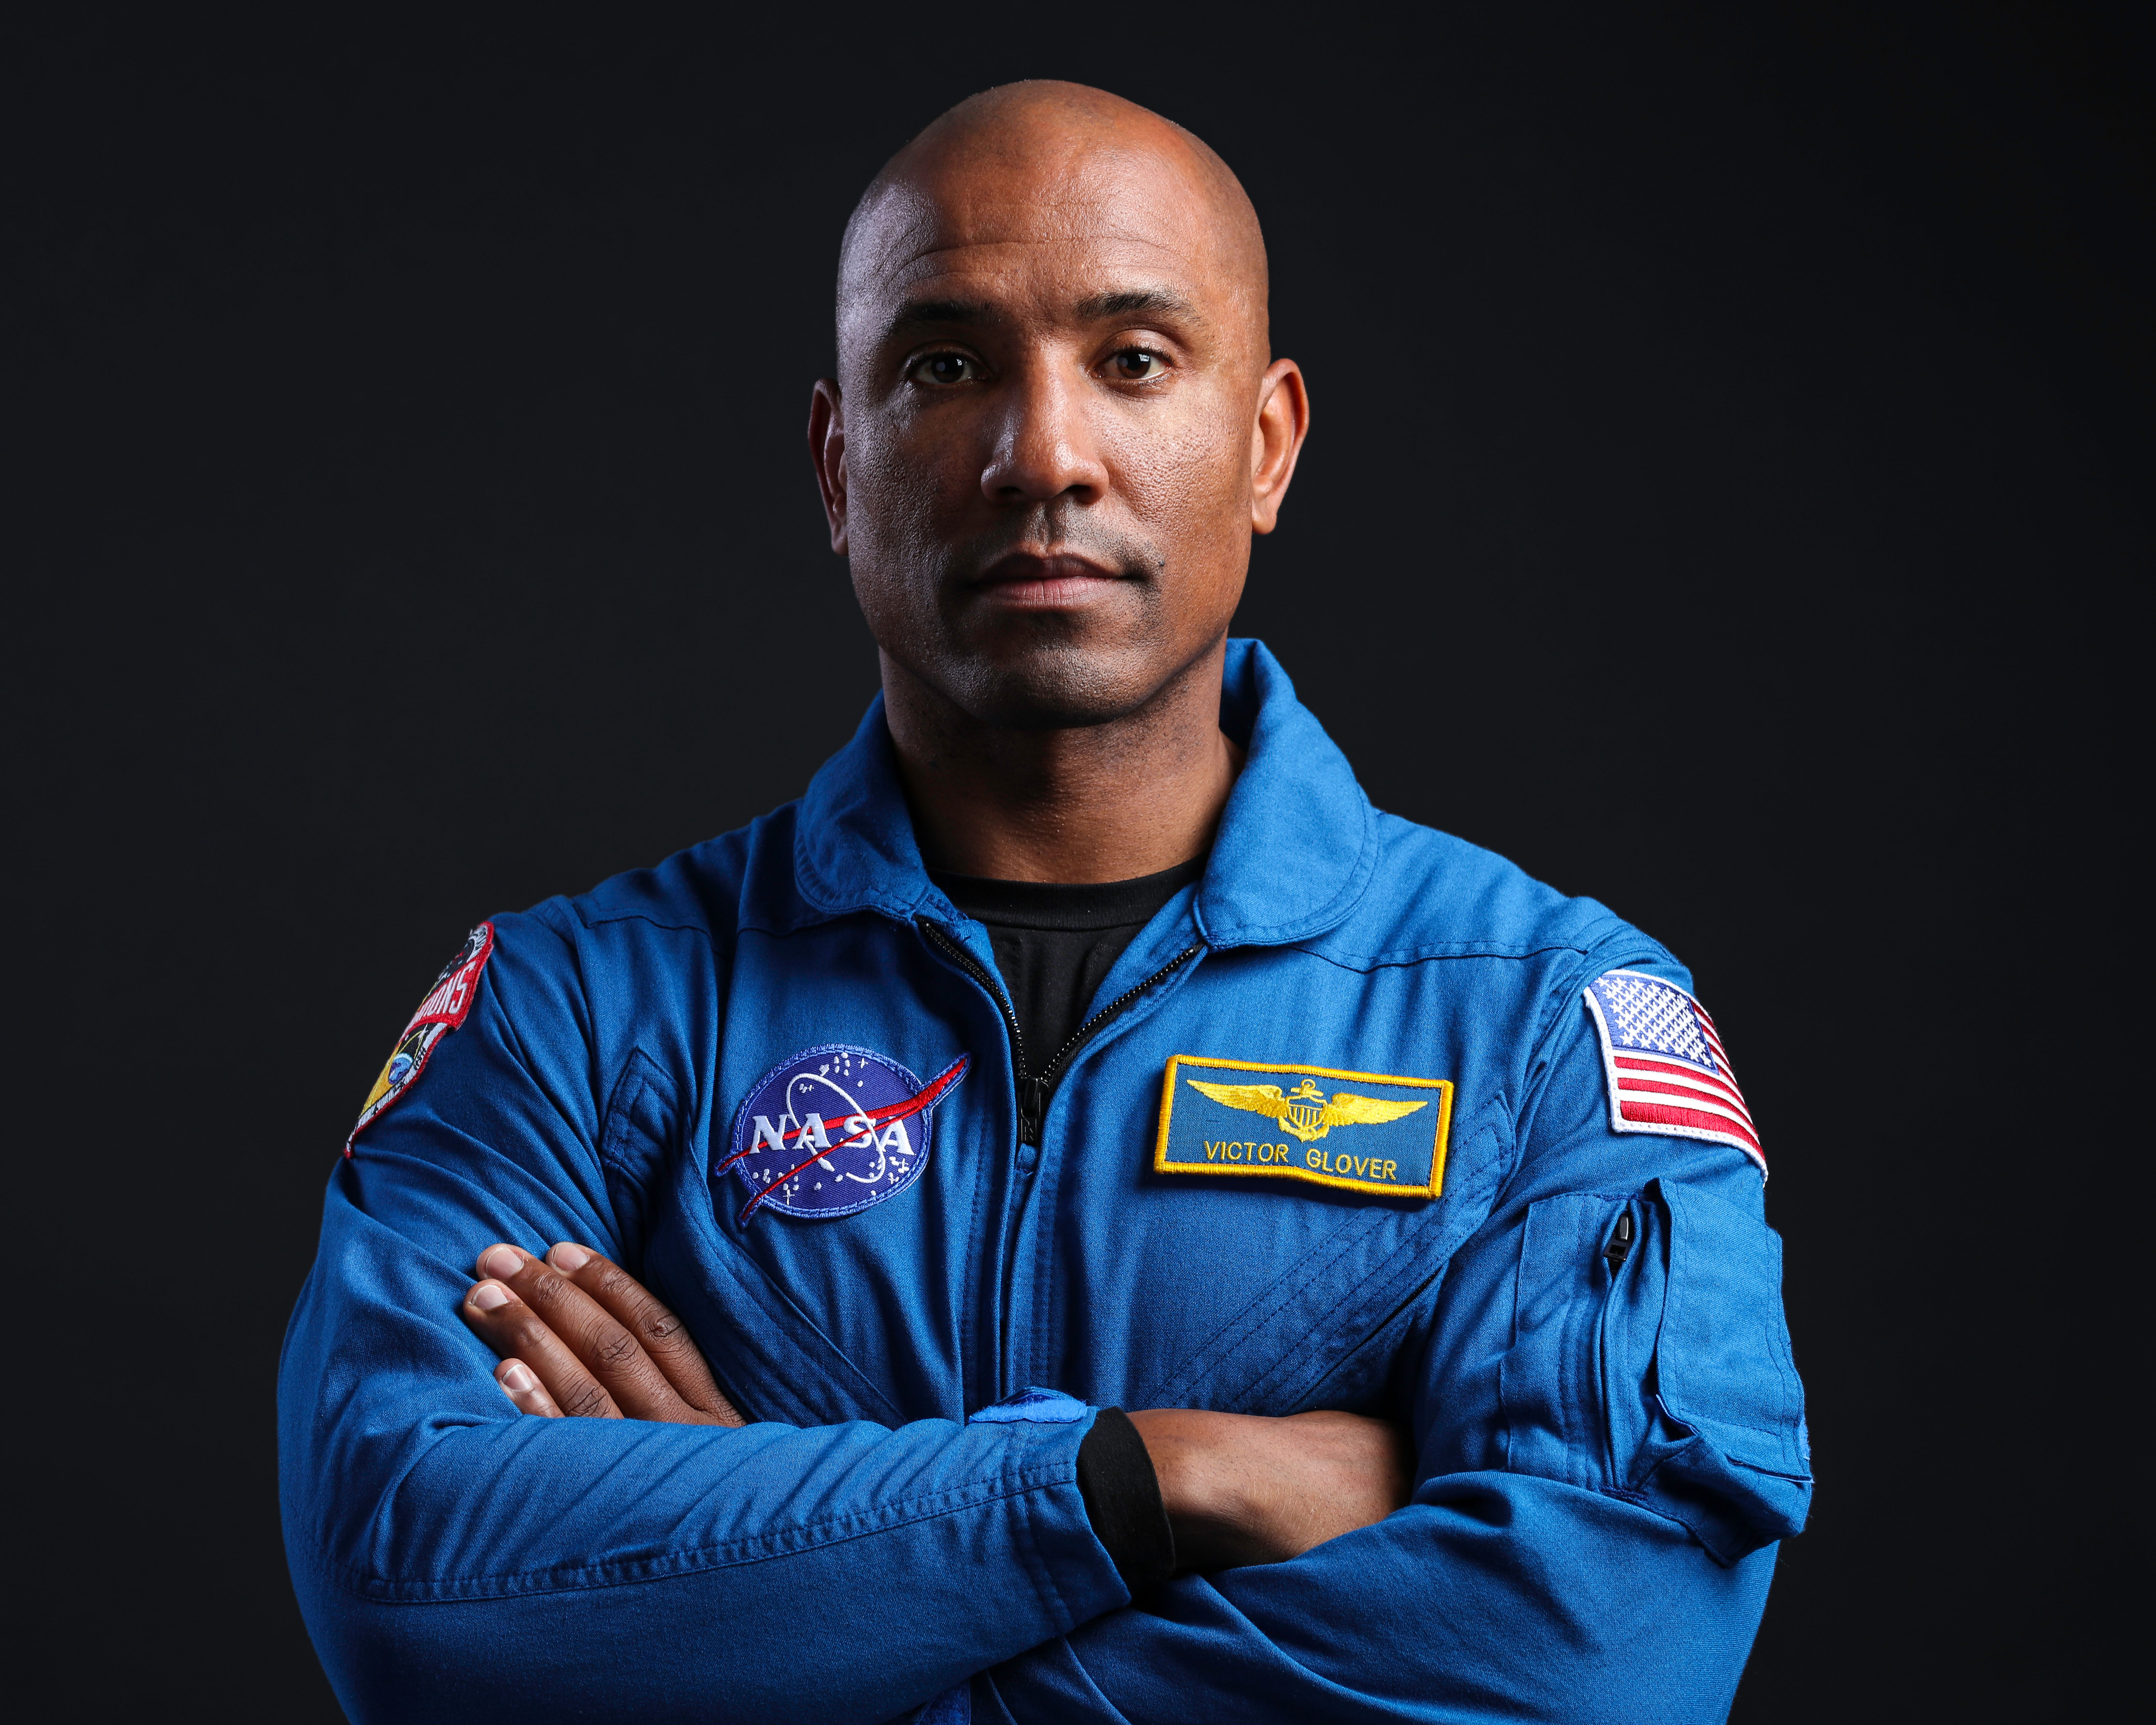 NASA's SpaceX Crew-1 Pilot Victor Glover is photographed in his blue NASA flight suit.